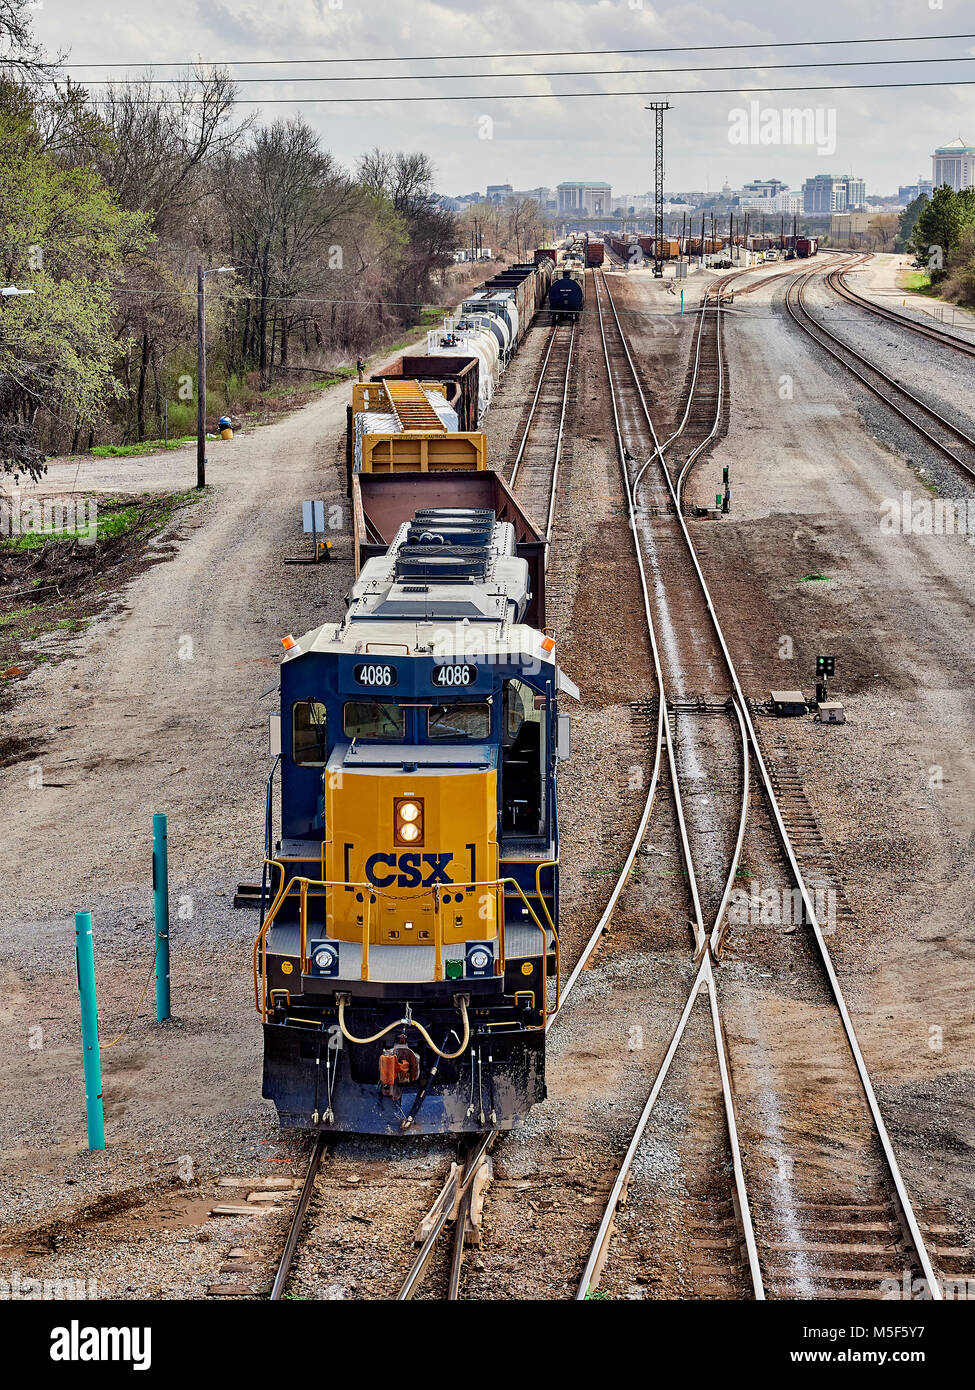 CSX Corporation locomotive engine 4086 moving freight or rail cars in the switching yard of CSX Transportation in Montgomery Alabama, USA. Stock Photo